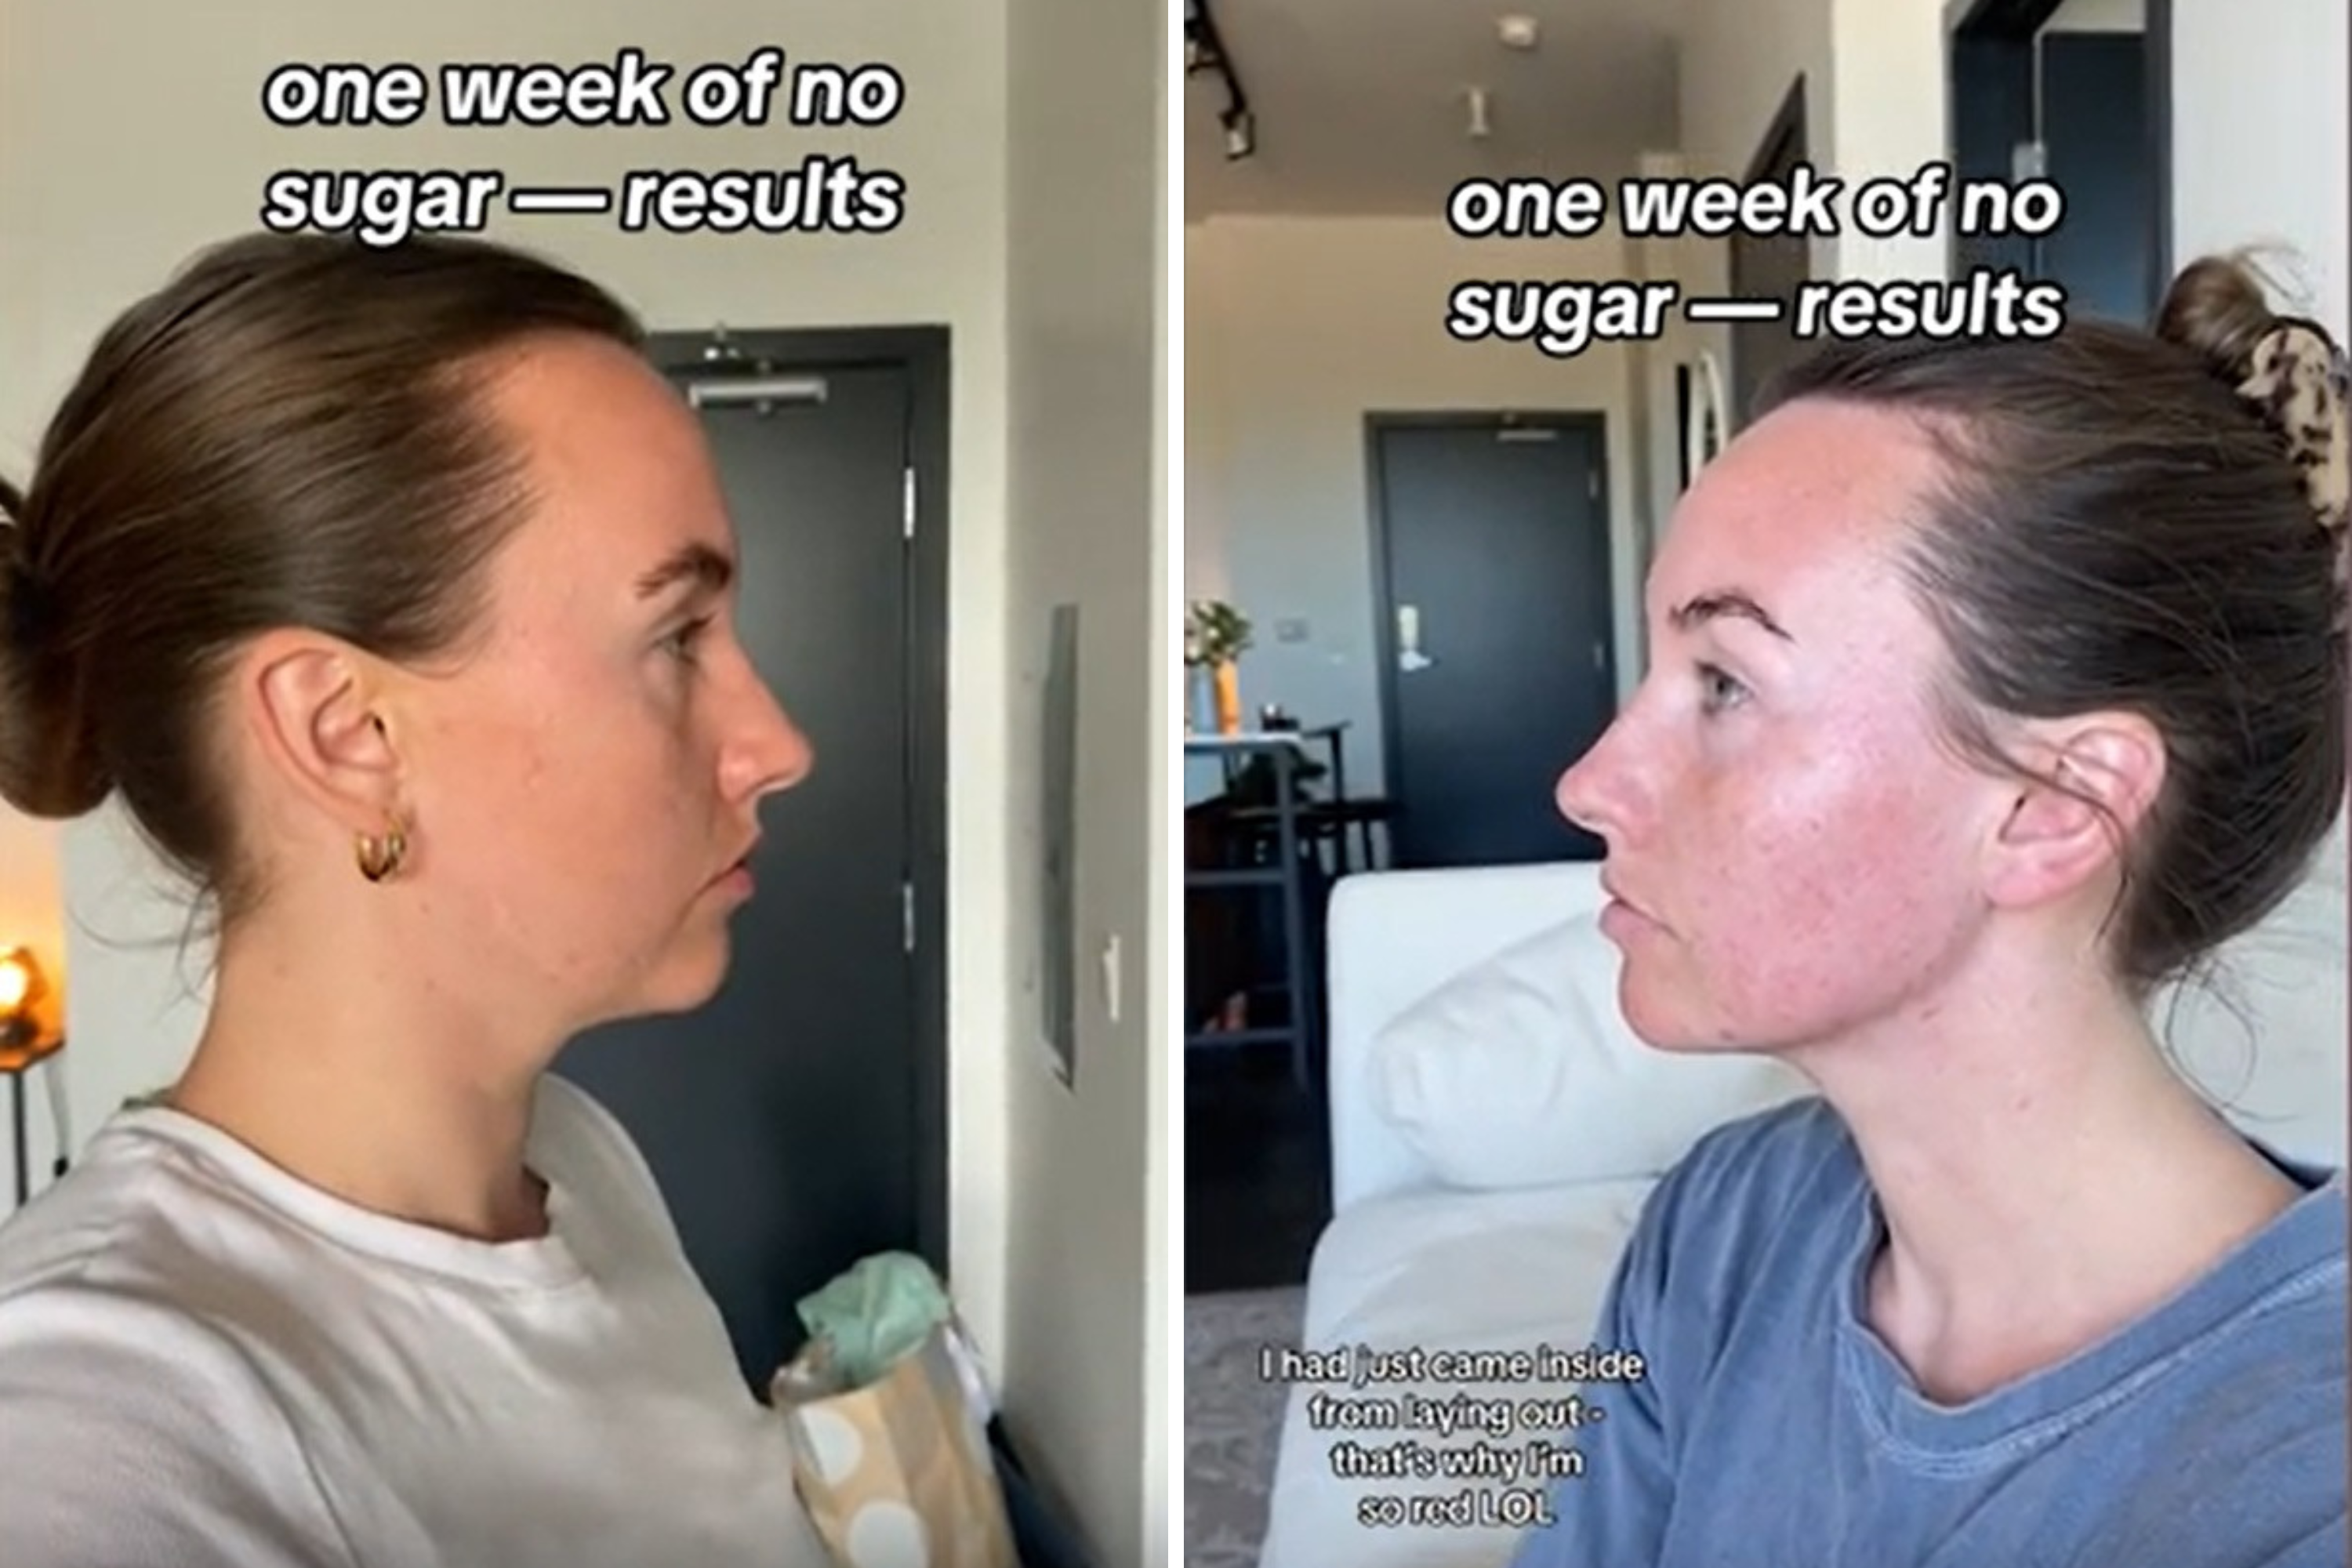 Woman shares how her jawline reappeared after just 